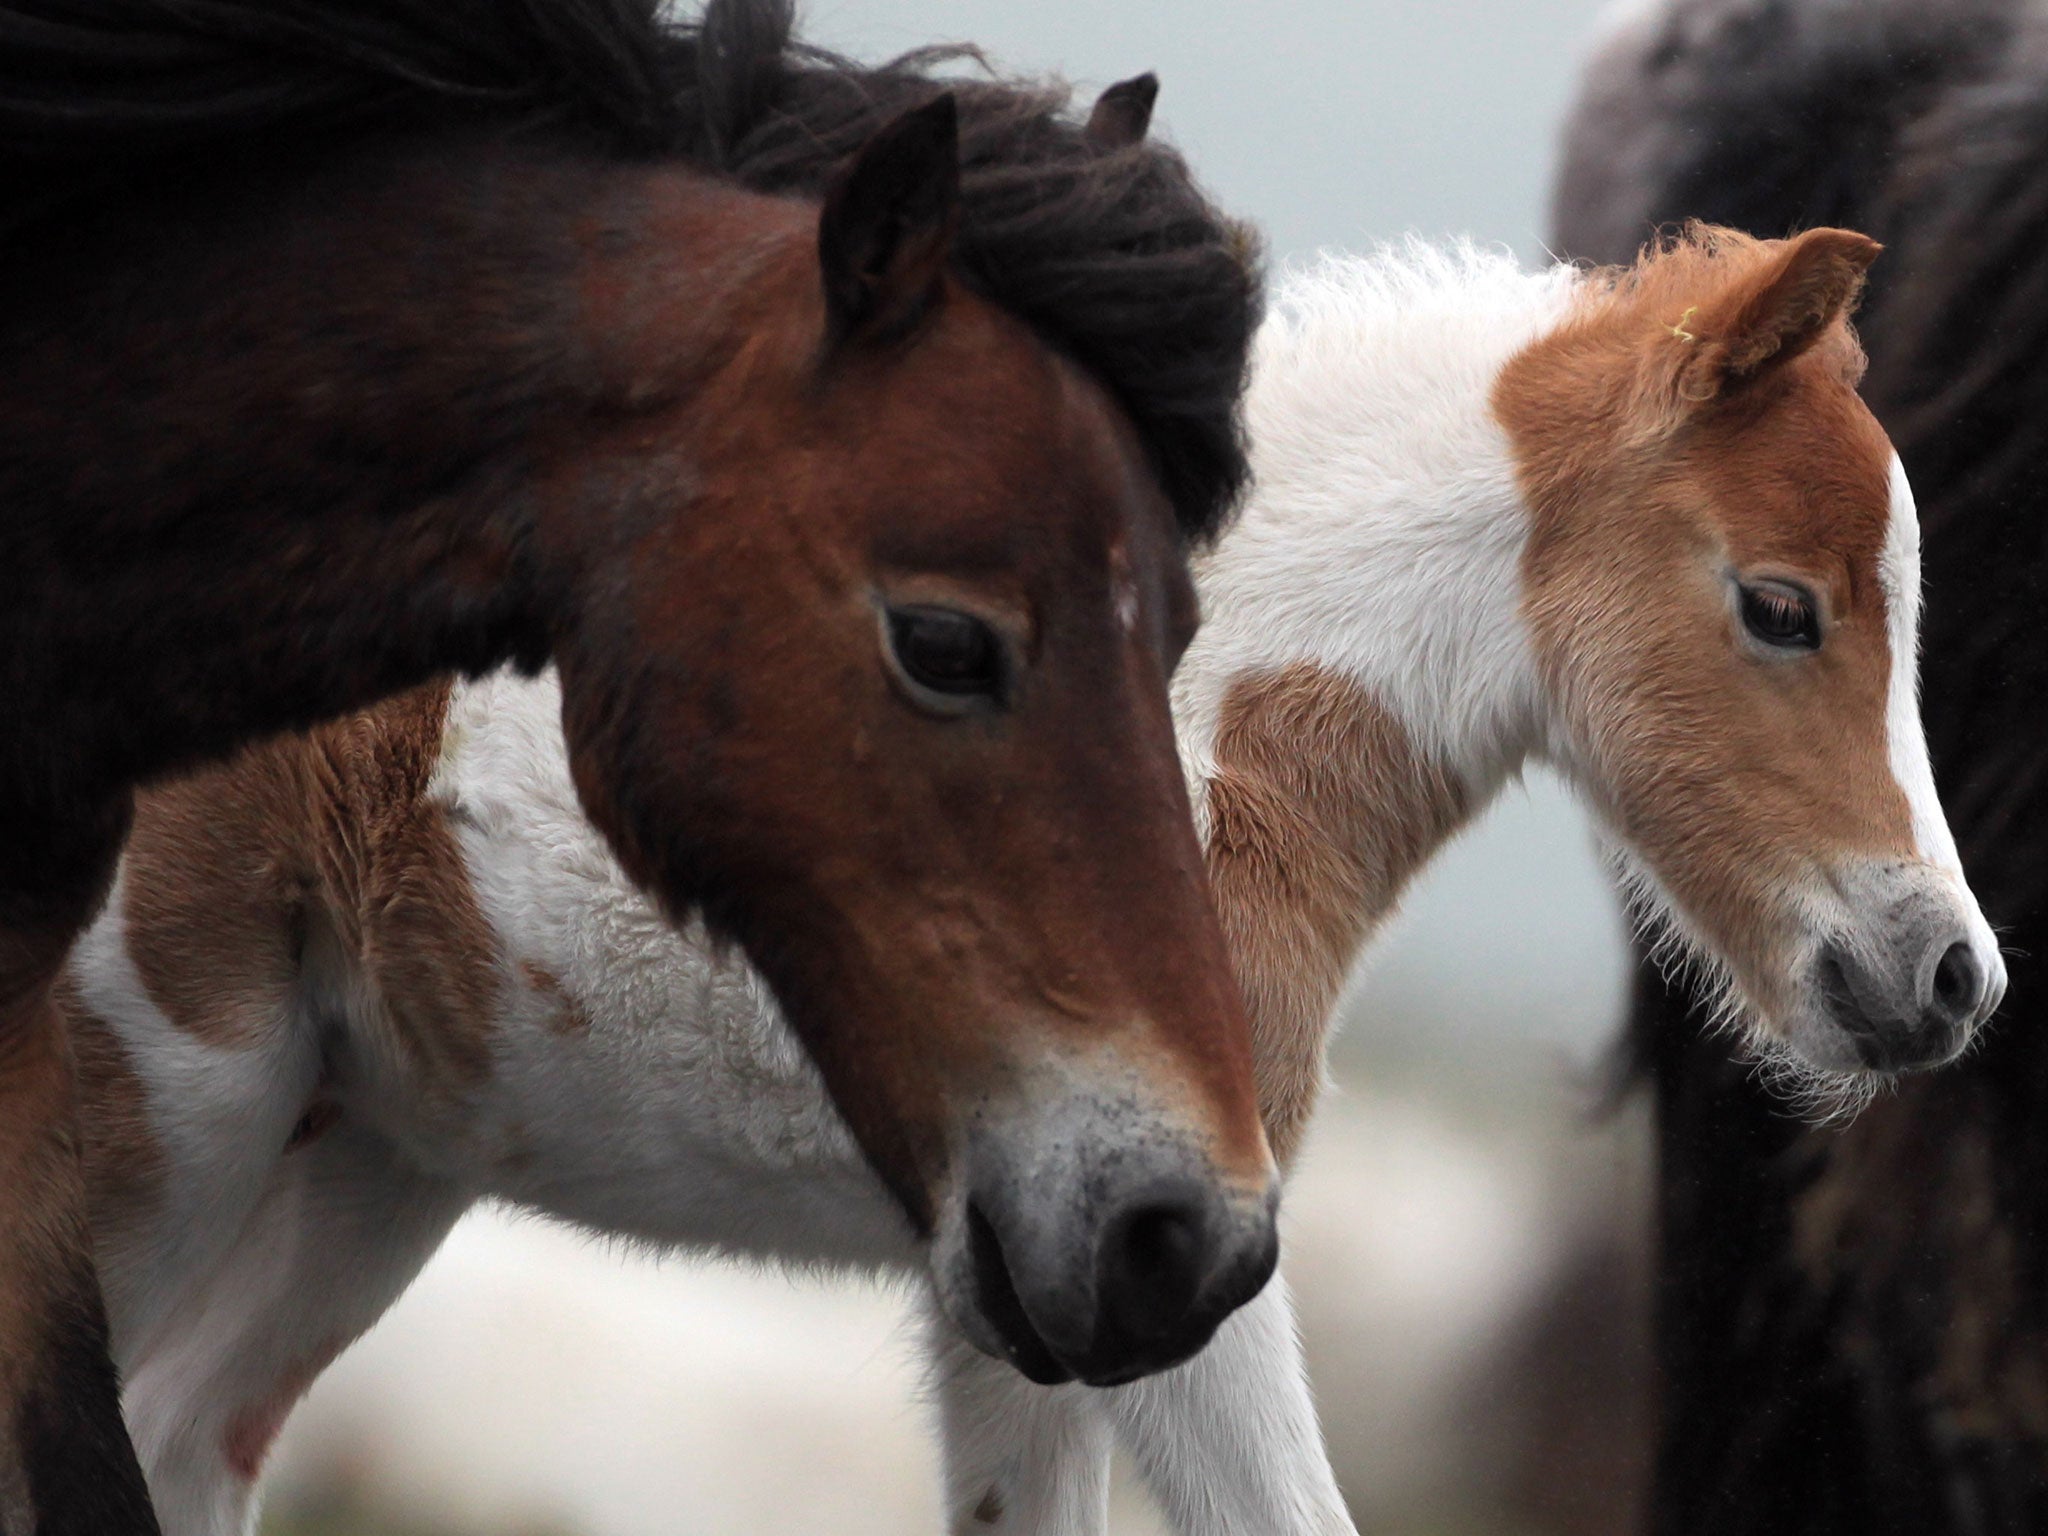 The number of Dartmoor ponies has fallen from more than 25,000 in the 1930s to less than 800